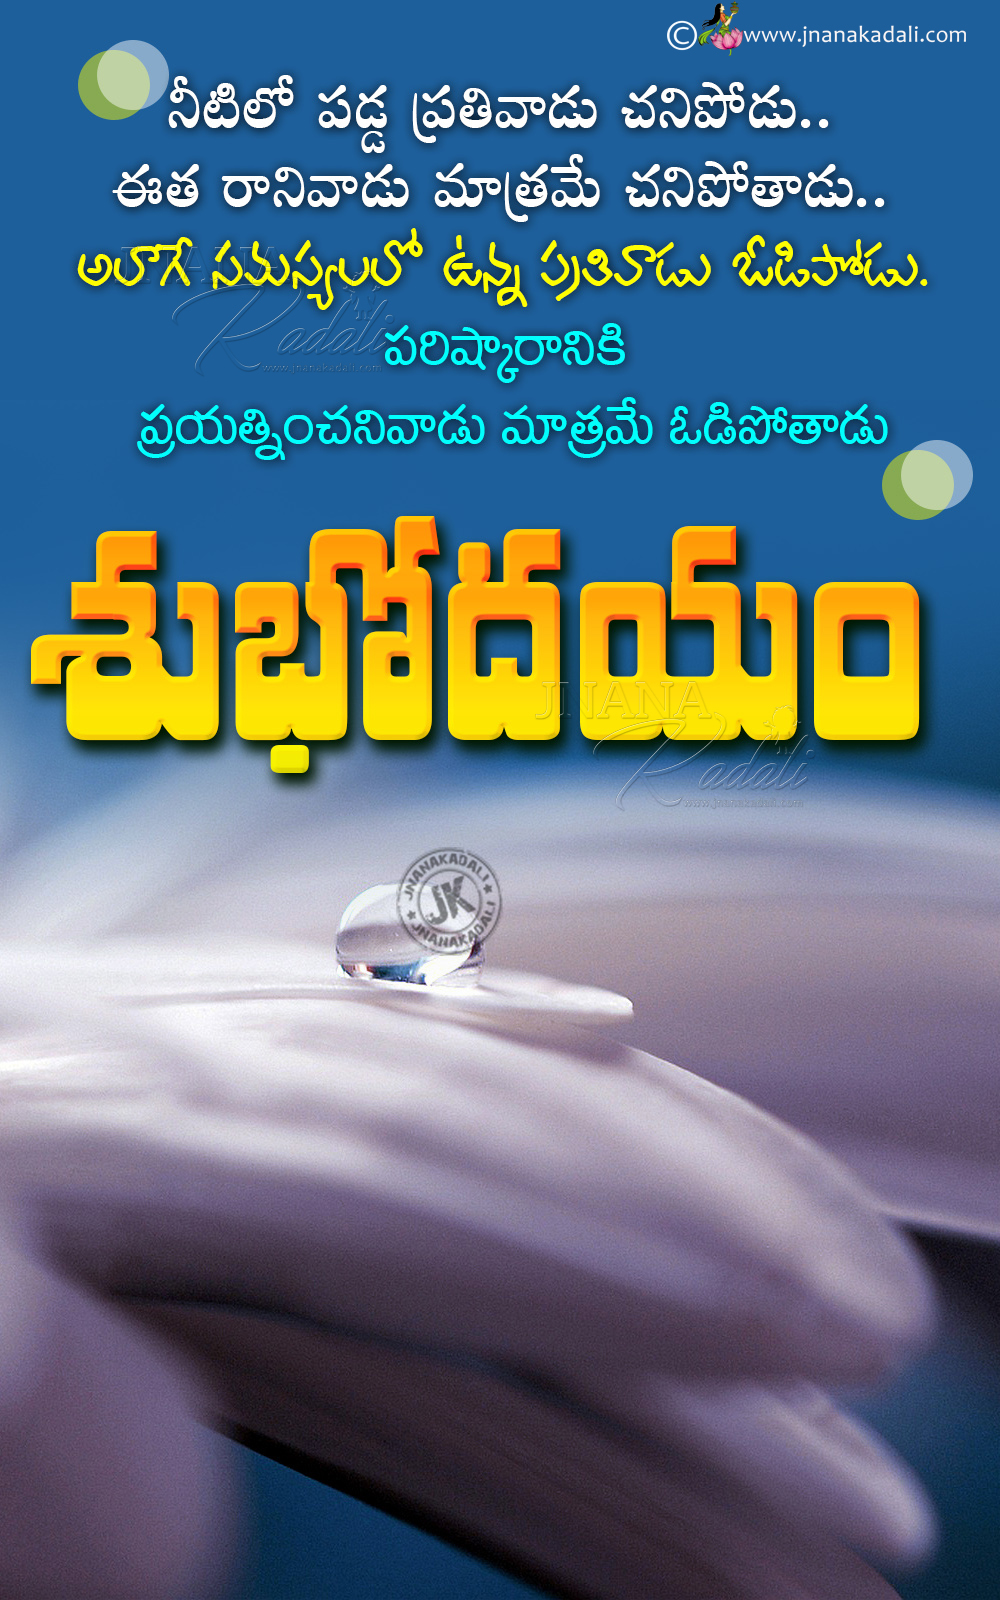 Most Inspirational Good Morning messages Quotes in Telugu | JNANA ...